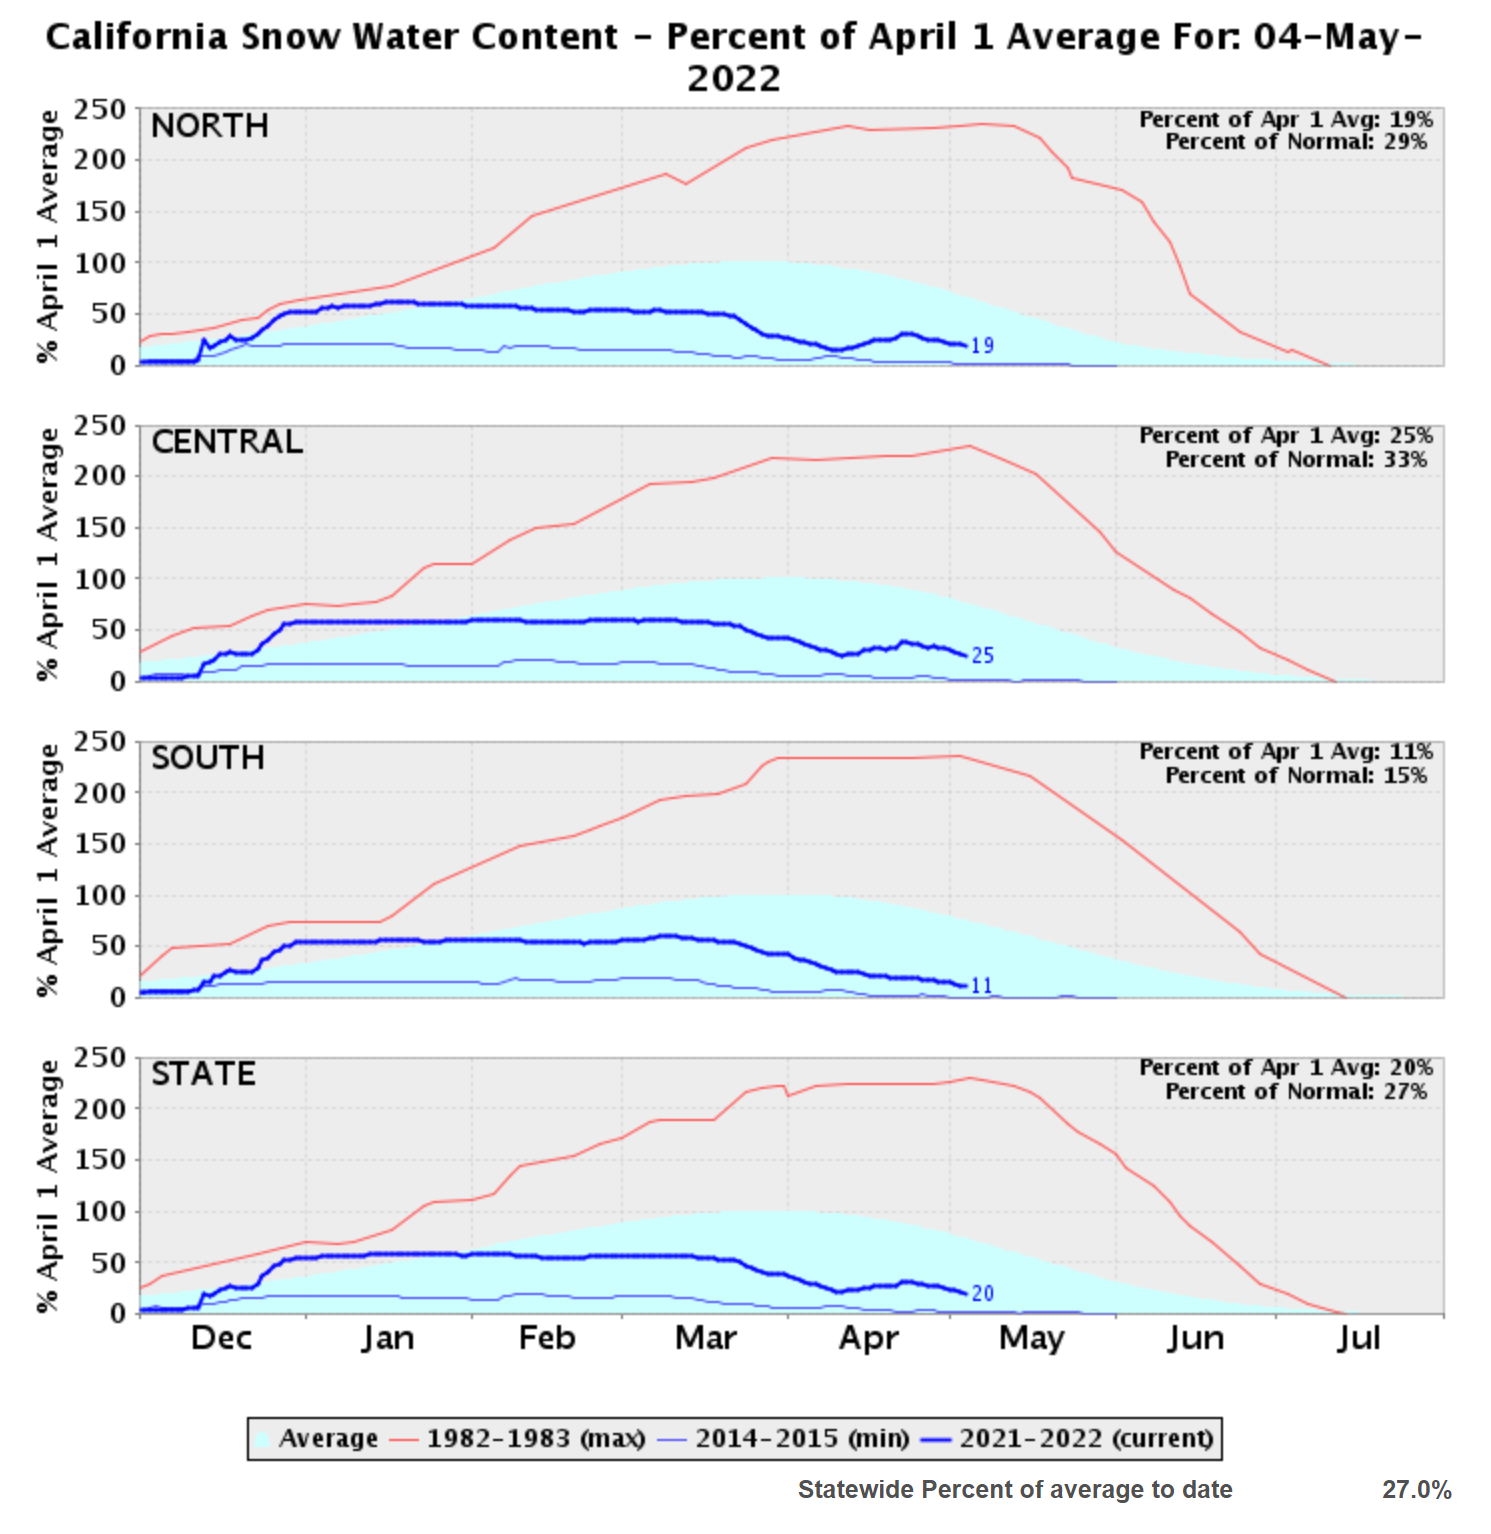 California snow water content for 4 April 2022, percent of April 1 average. Graphic: California Department of Water Resources